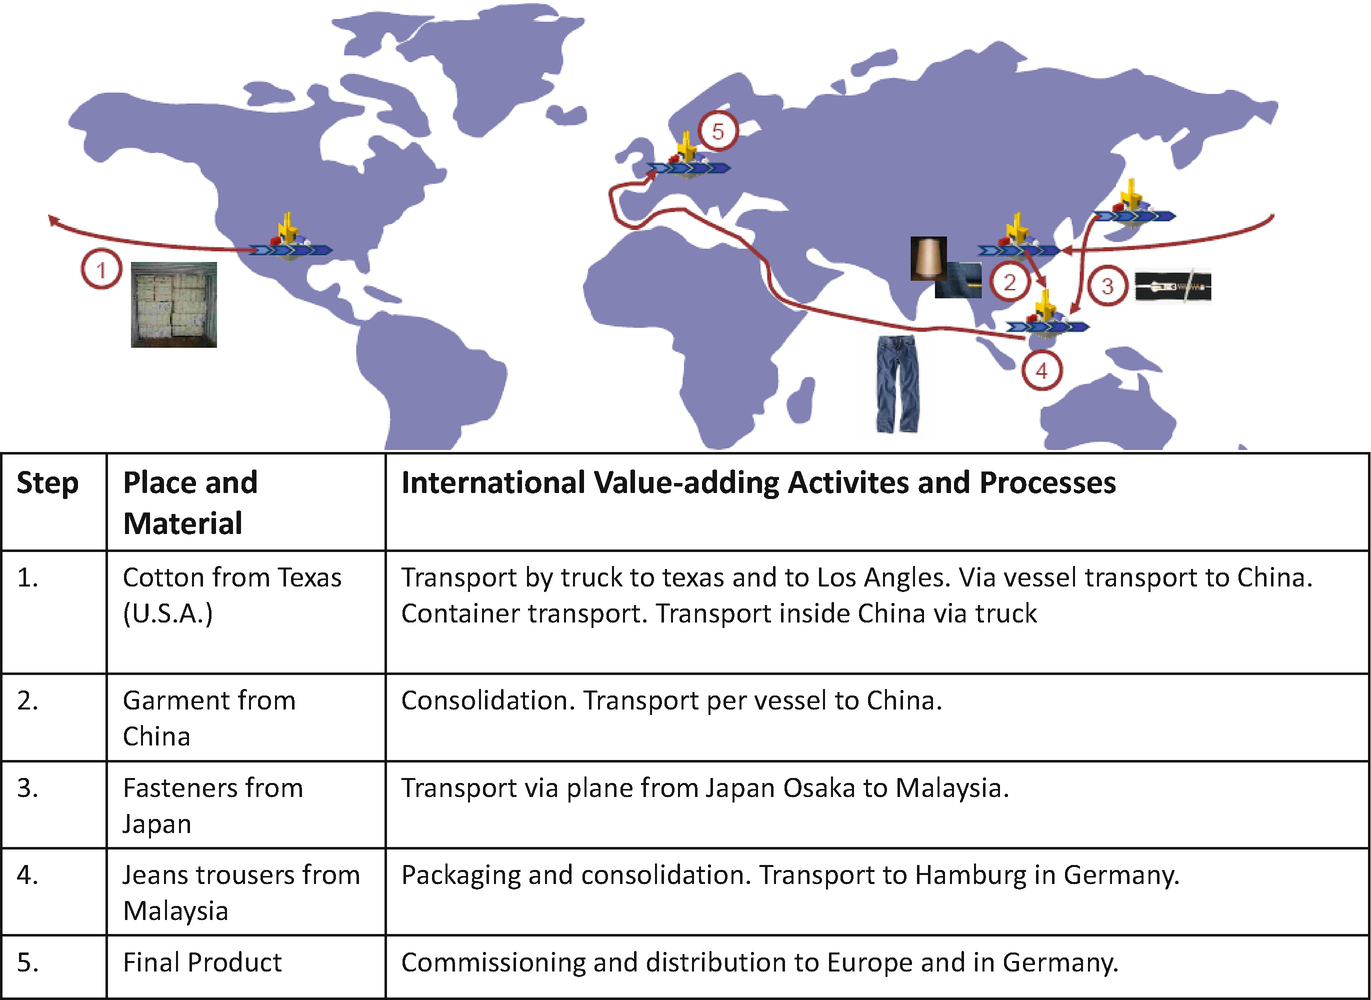 Global Supply Chain and Logistics | SpringerLink